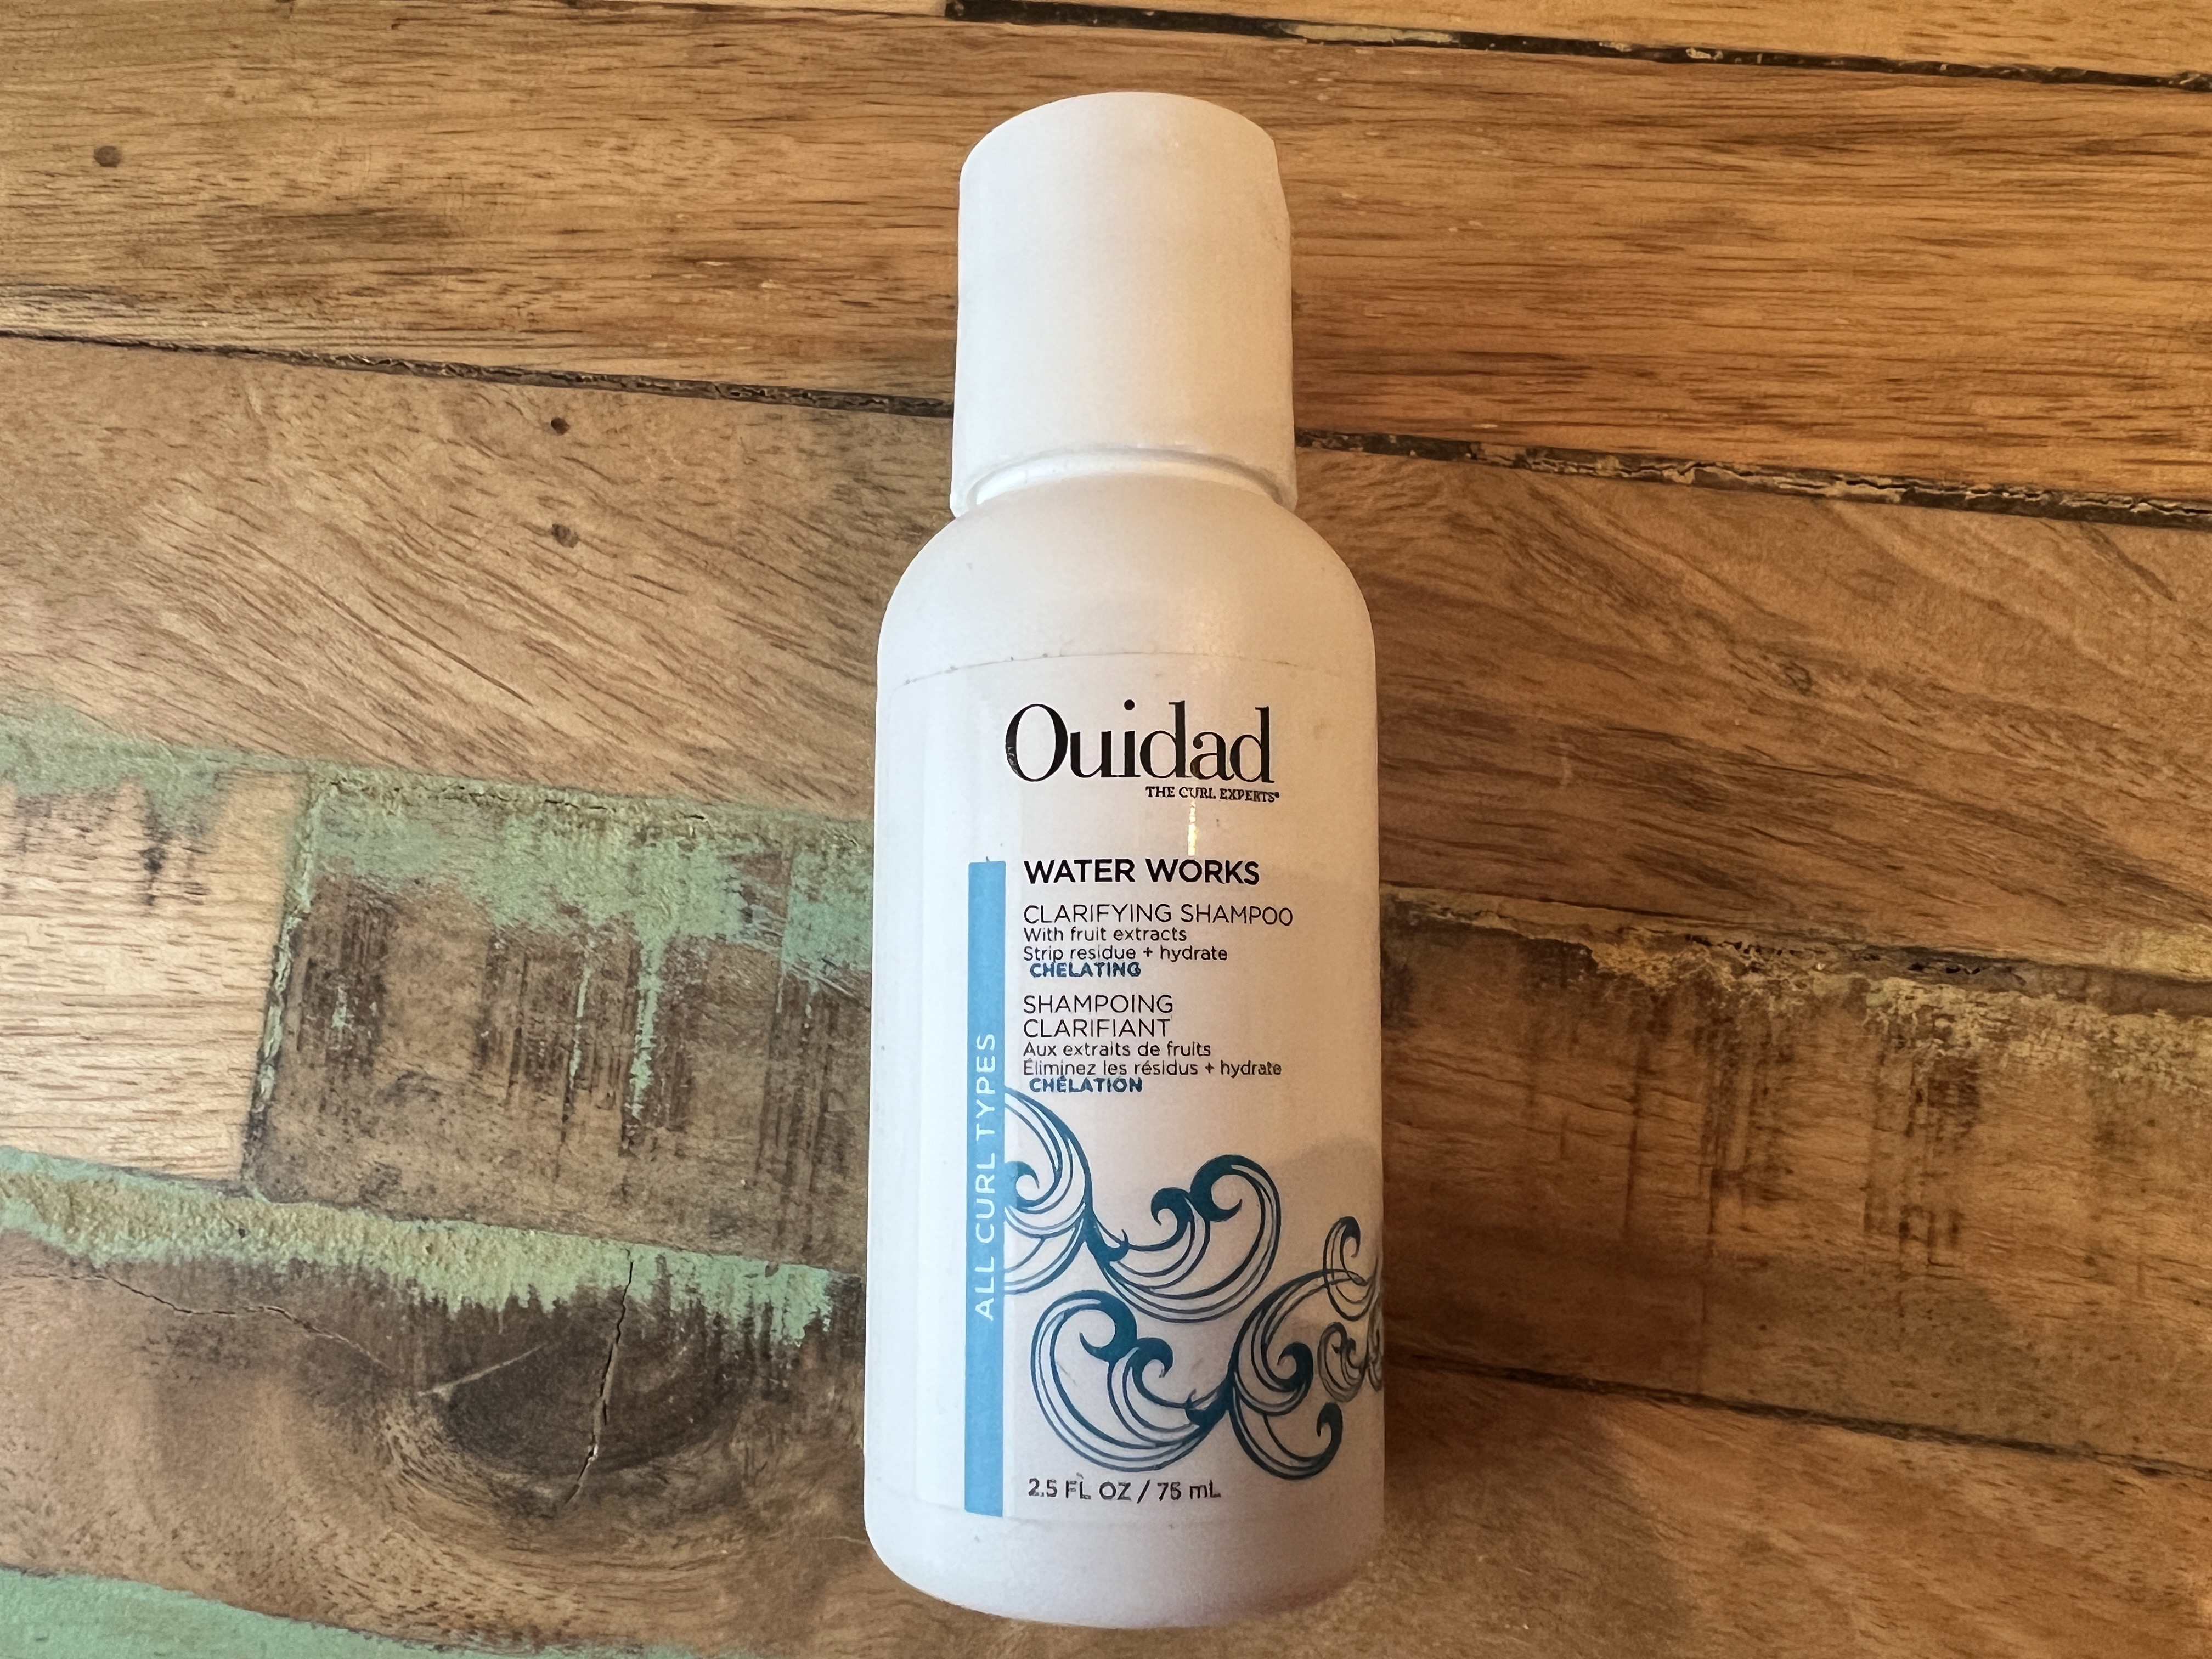 Ouidad: The Curl Experts - Water Works clarifying shampoo with fruit extracts.